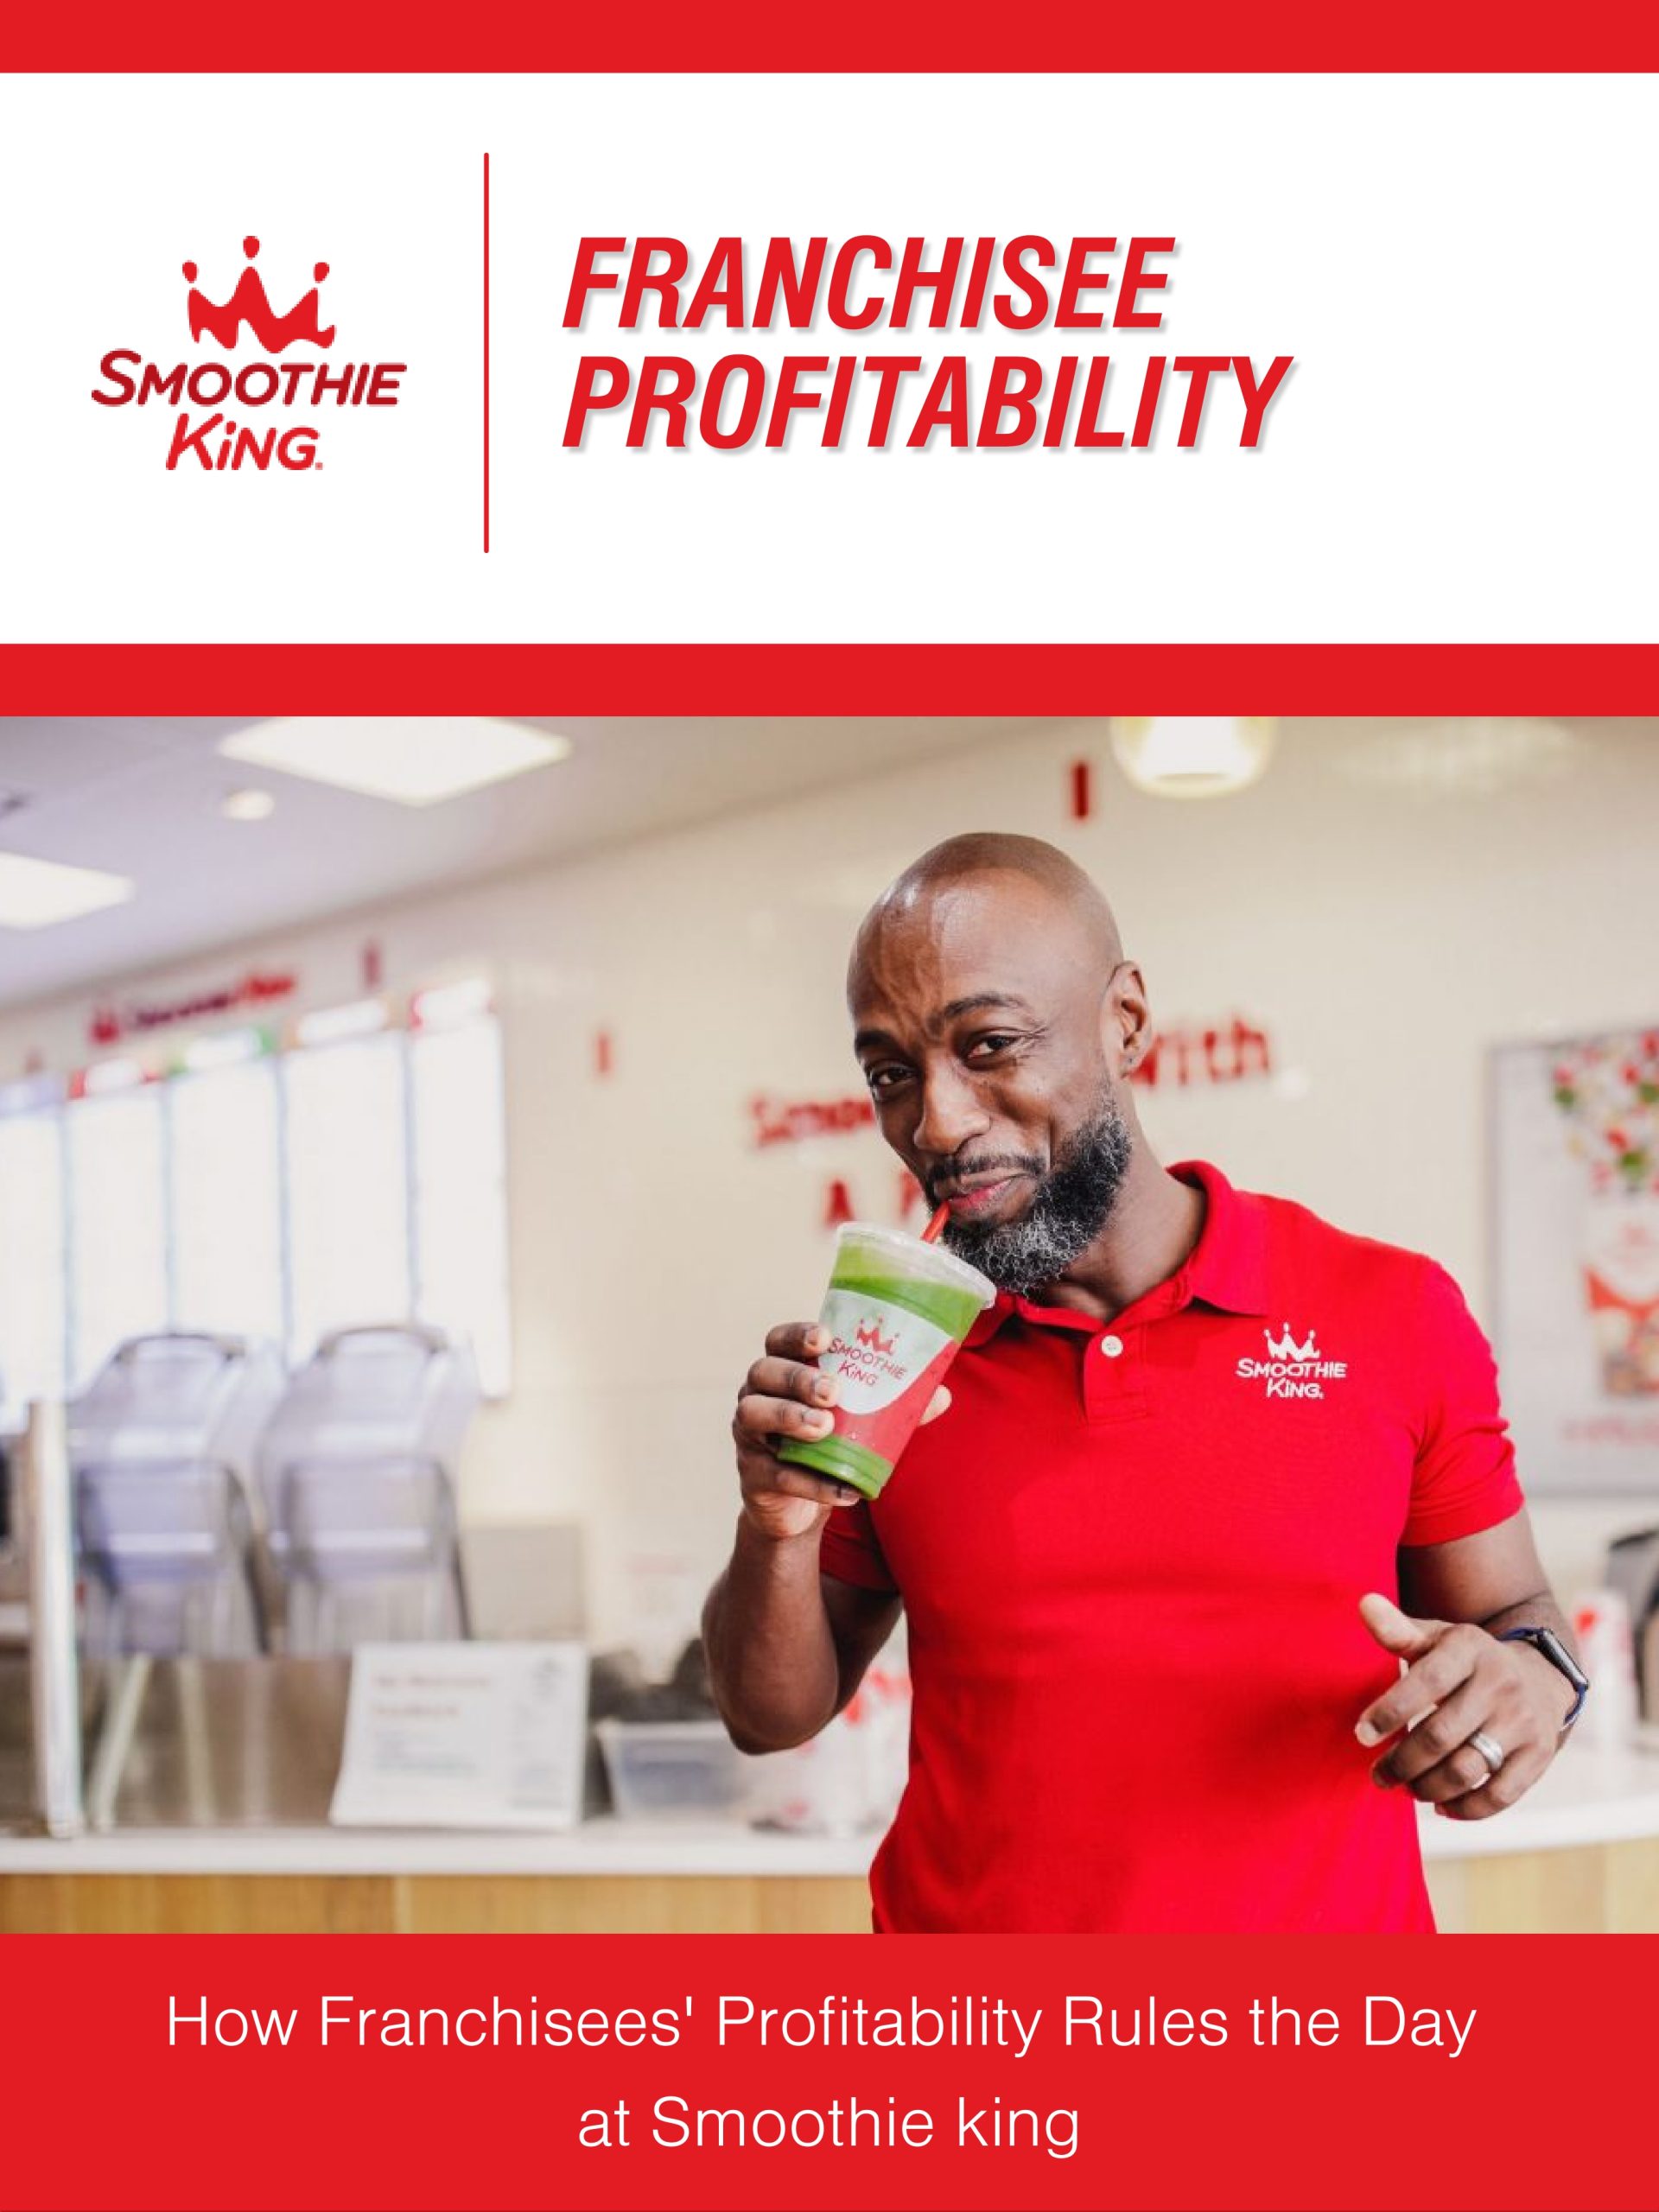 How franchisees' Profitability Rules the Day at Smoothie King?